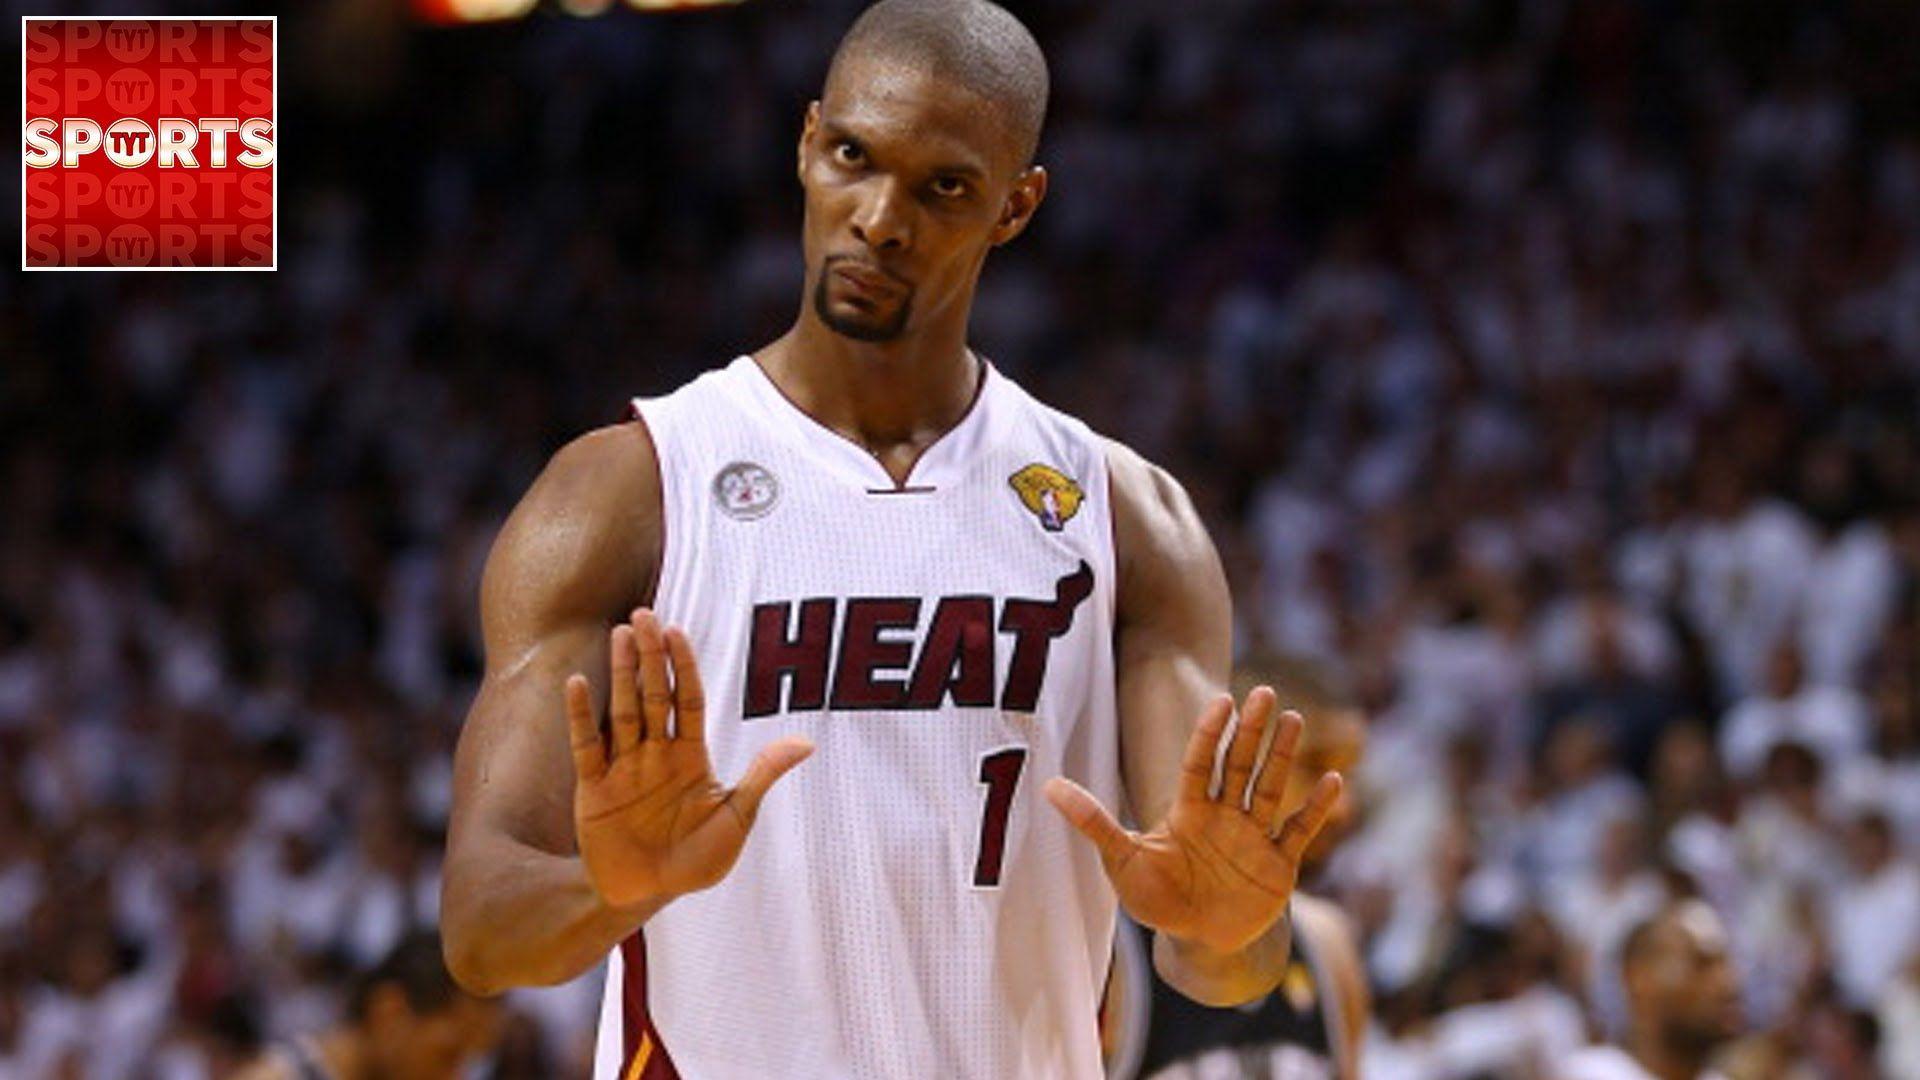 Chris Bosh's Career Is Over with the Miami Heat